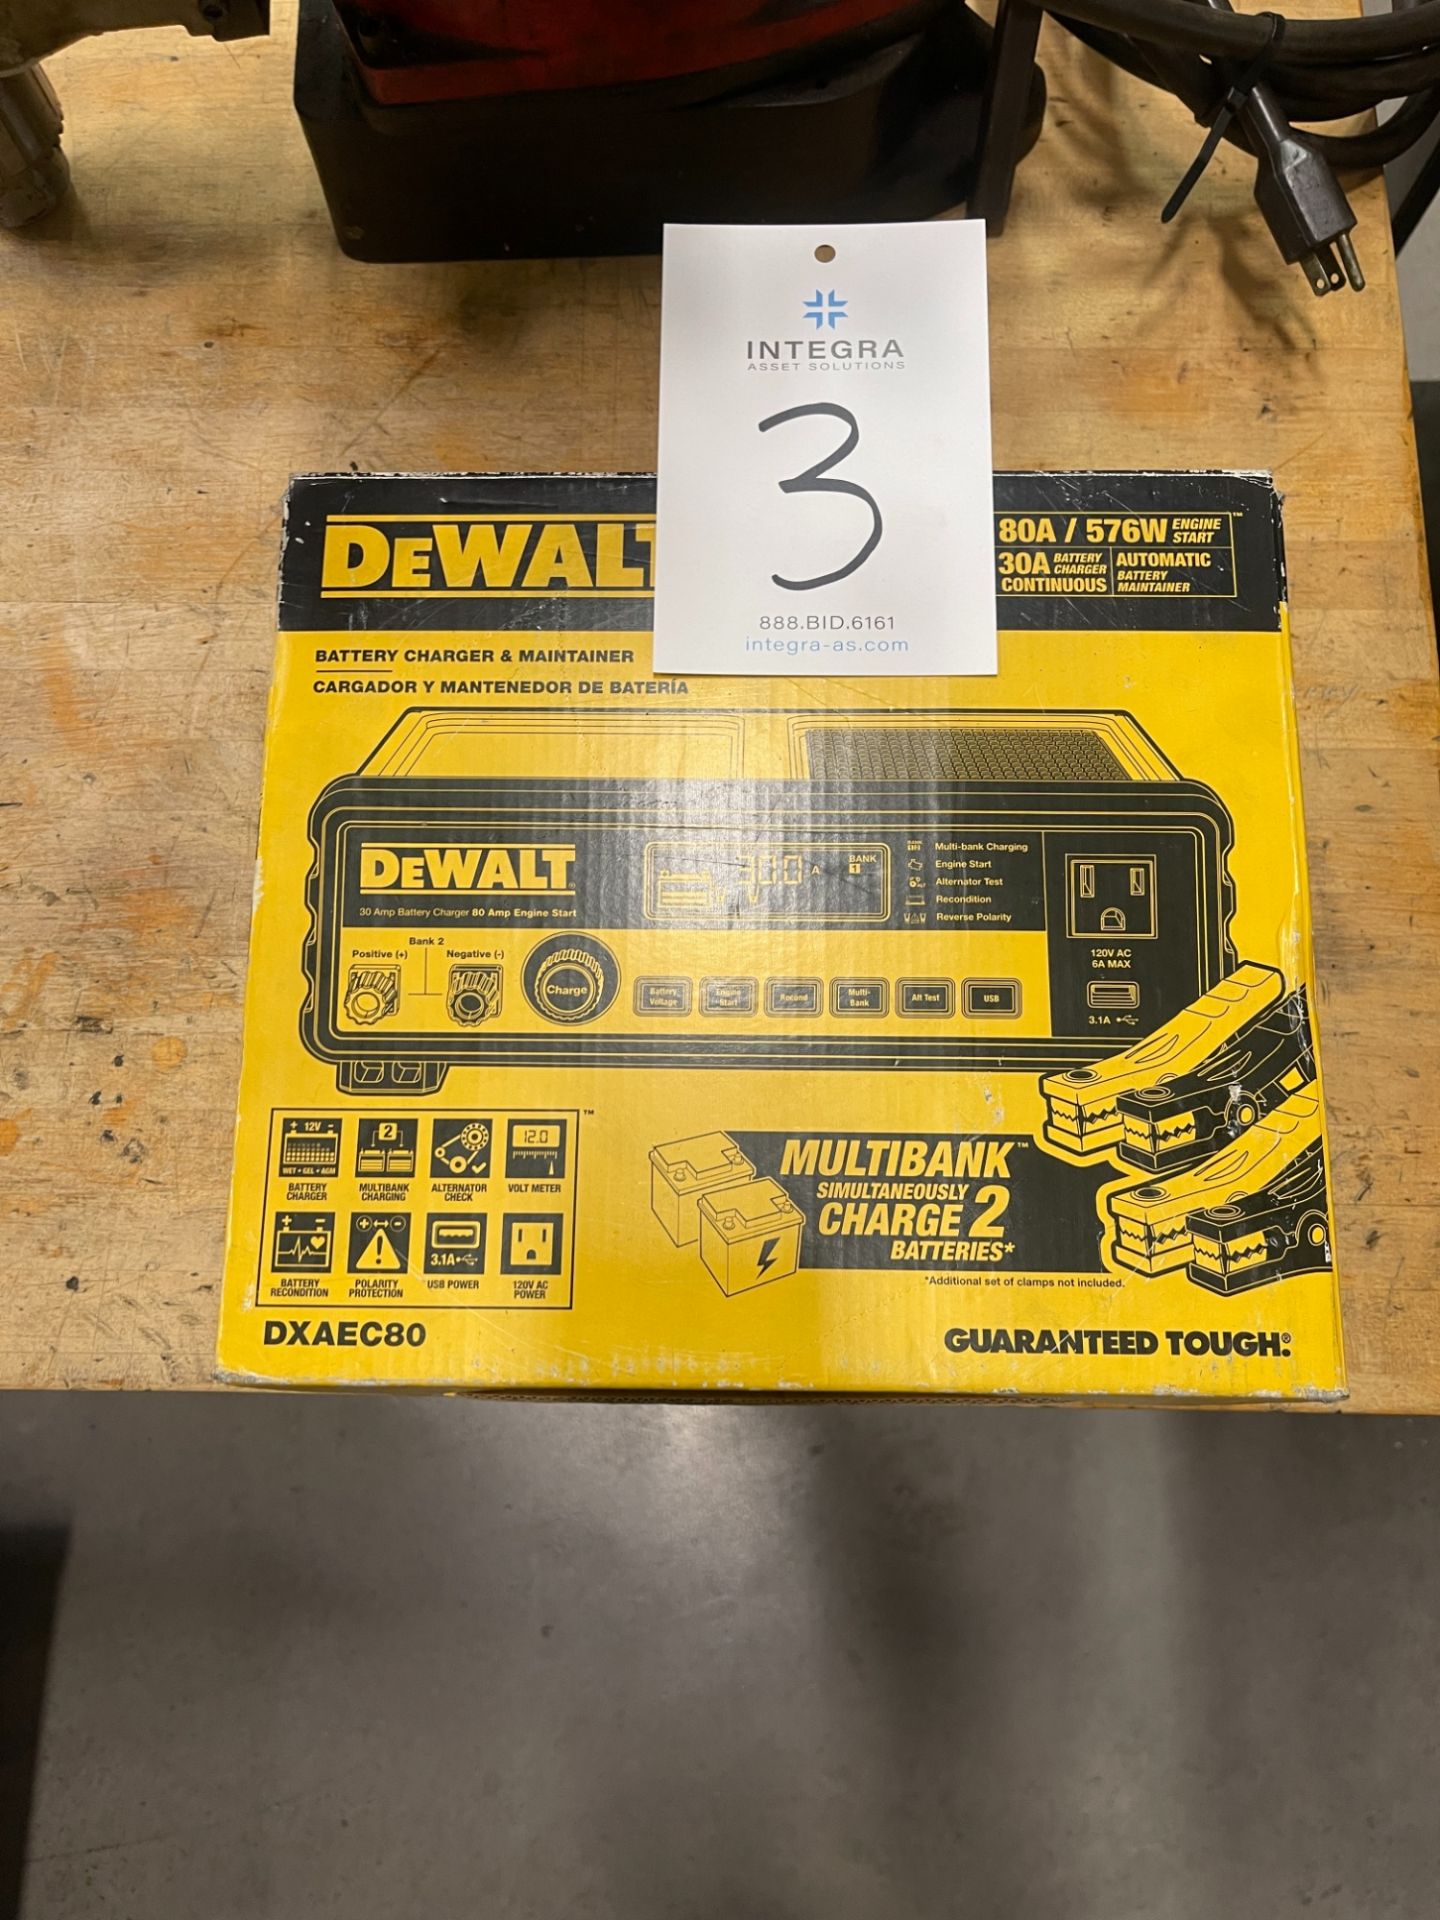 Dewalt DXAEC80 80A / 576W Battery Charger & Maintainer